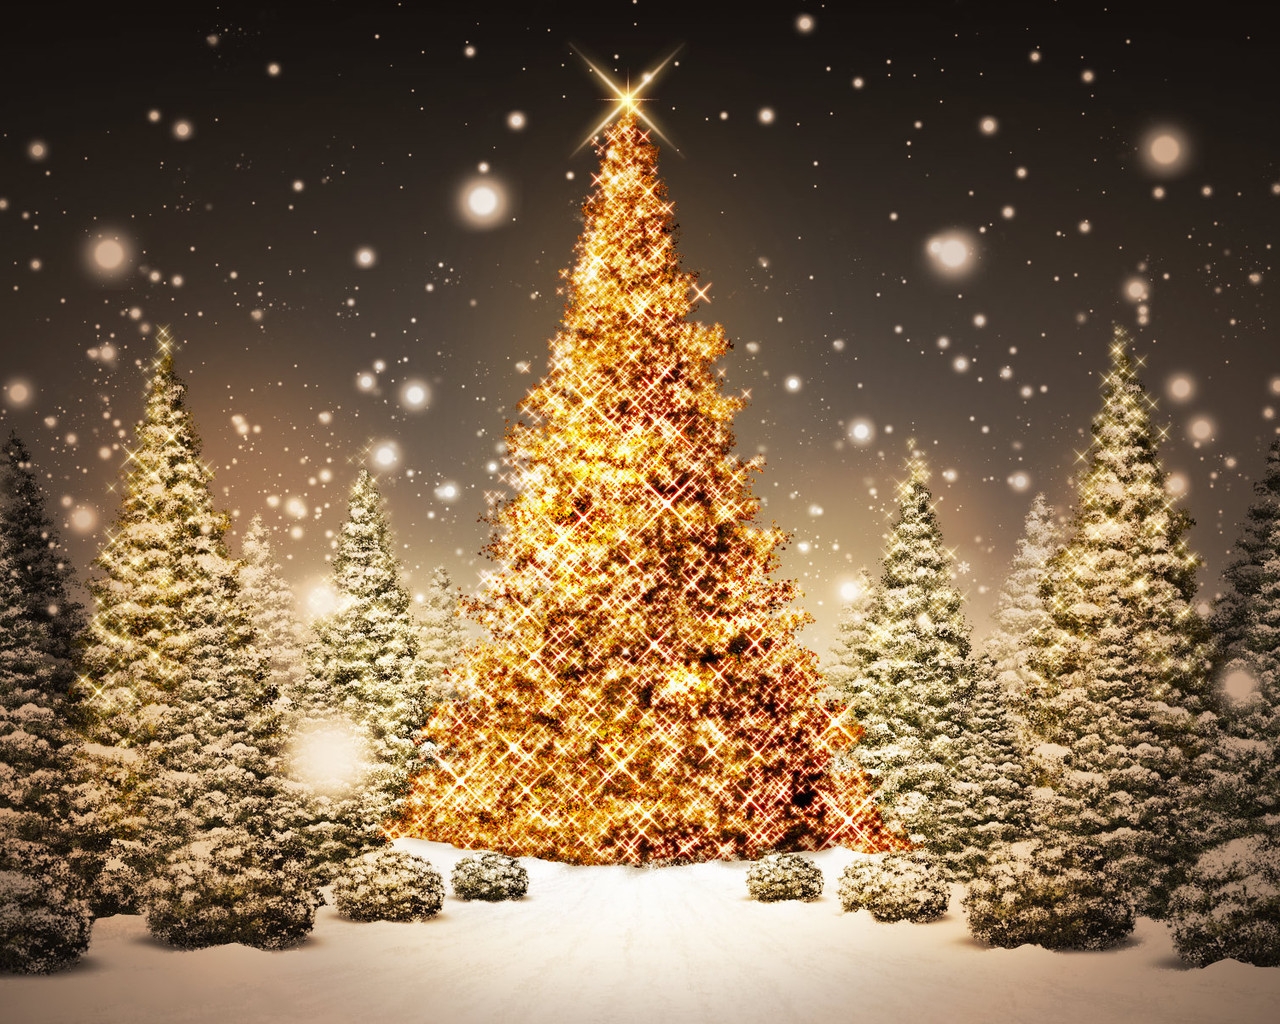 Christmas Trees for 1280 x 1024 resolution